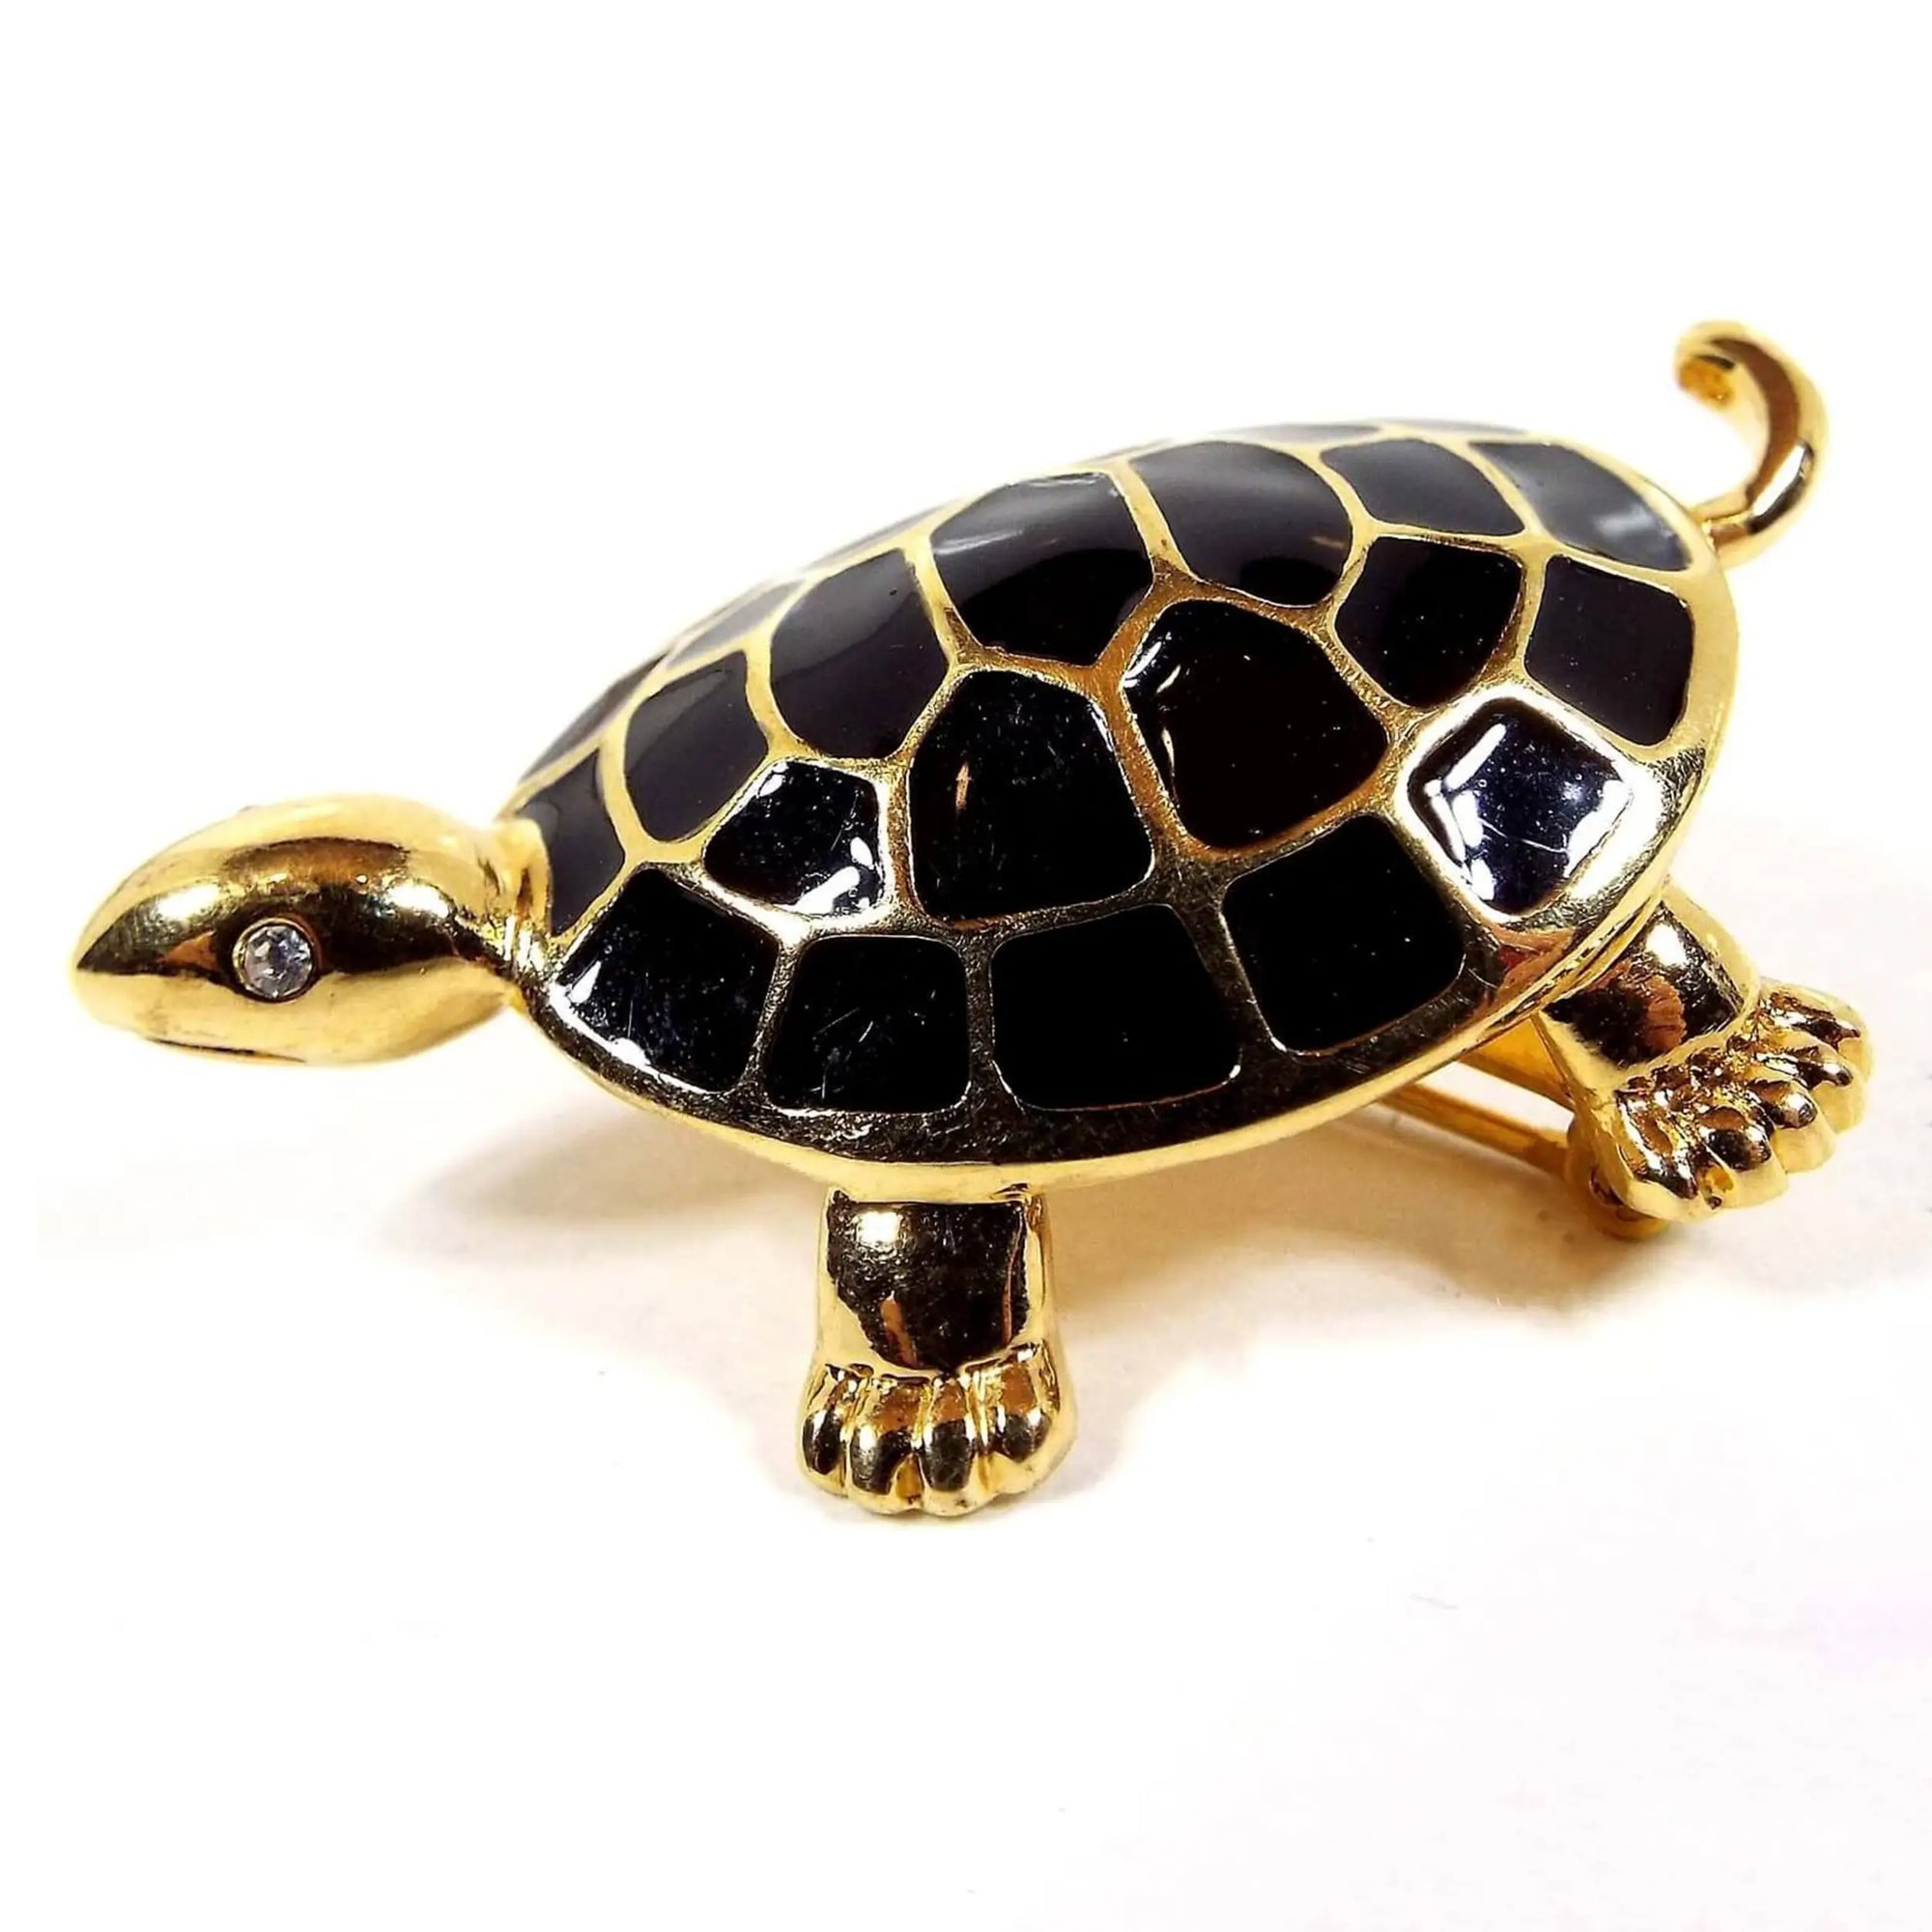 Side view of the retro vintage turtle brooch pin. The metal is gold tone in color. The turtle has clear rhinestone eyes and the pattern on his shell is black enameled.